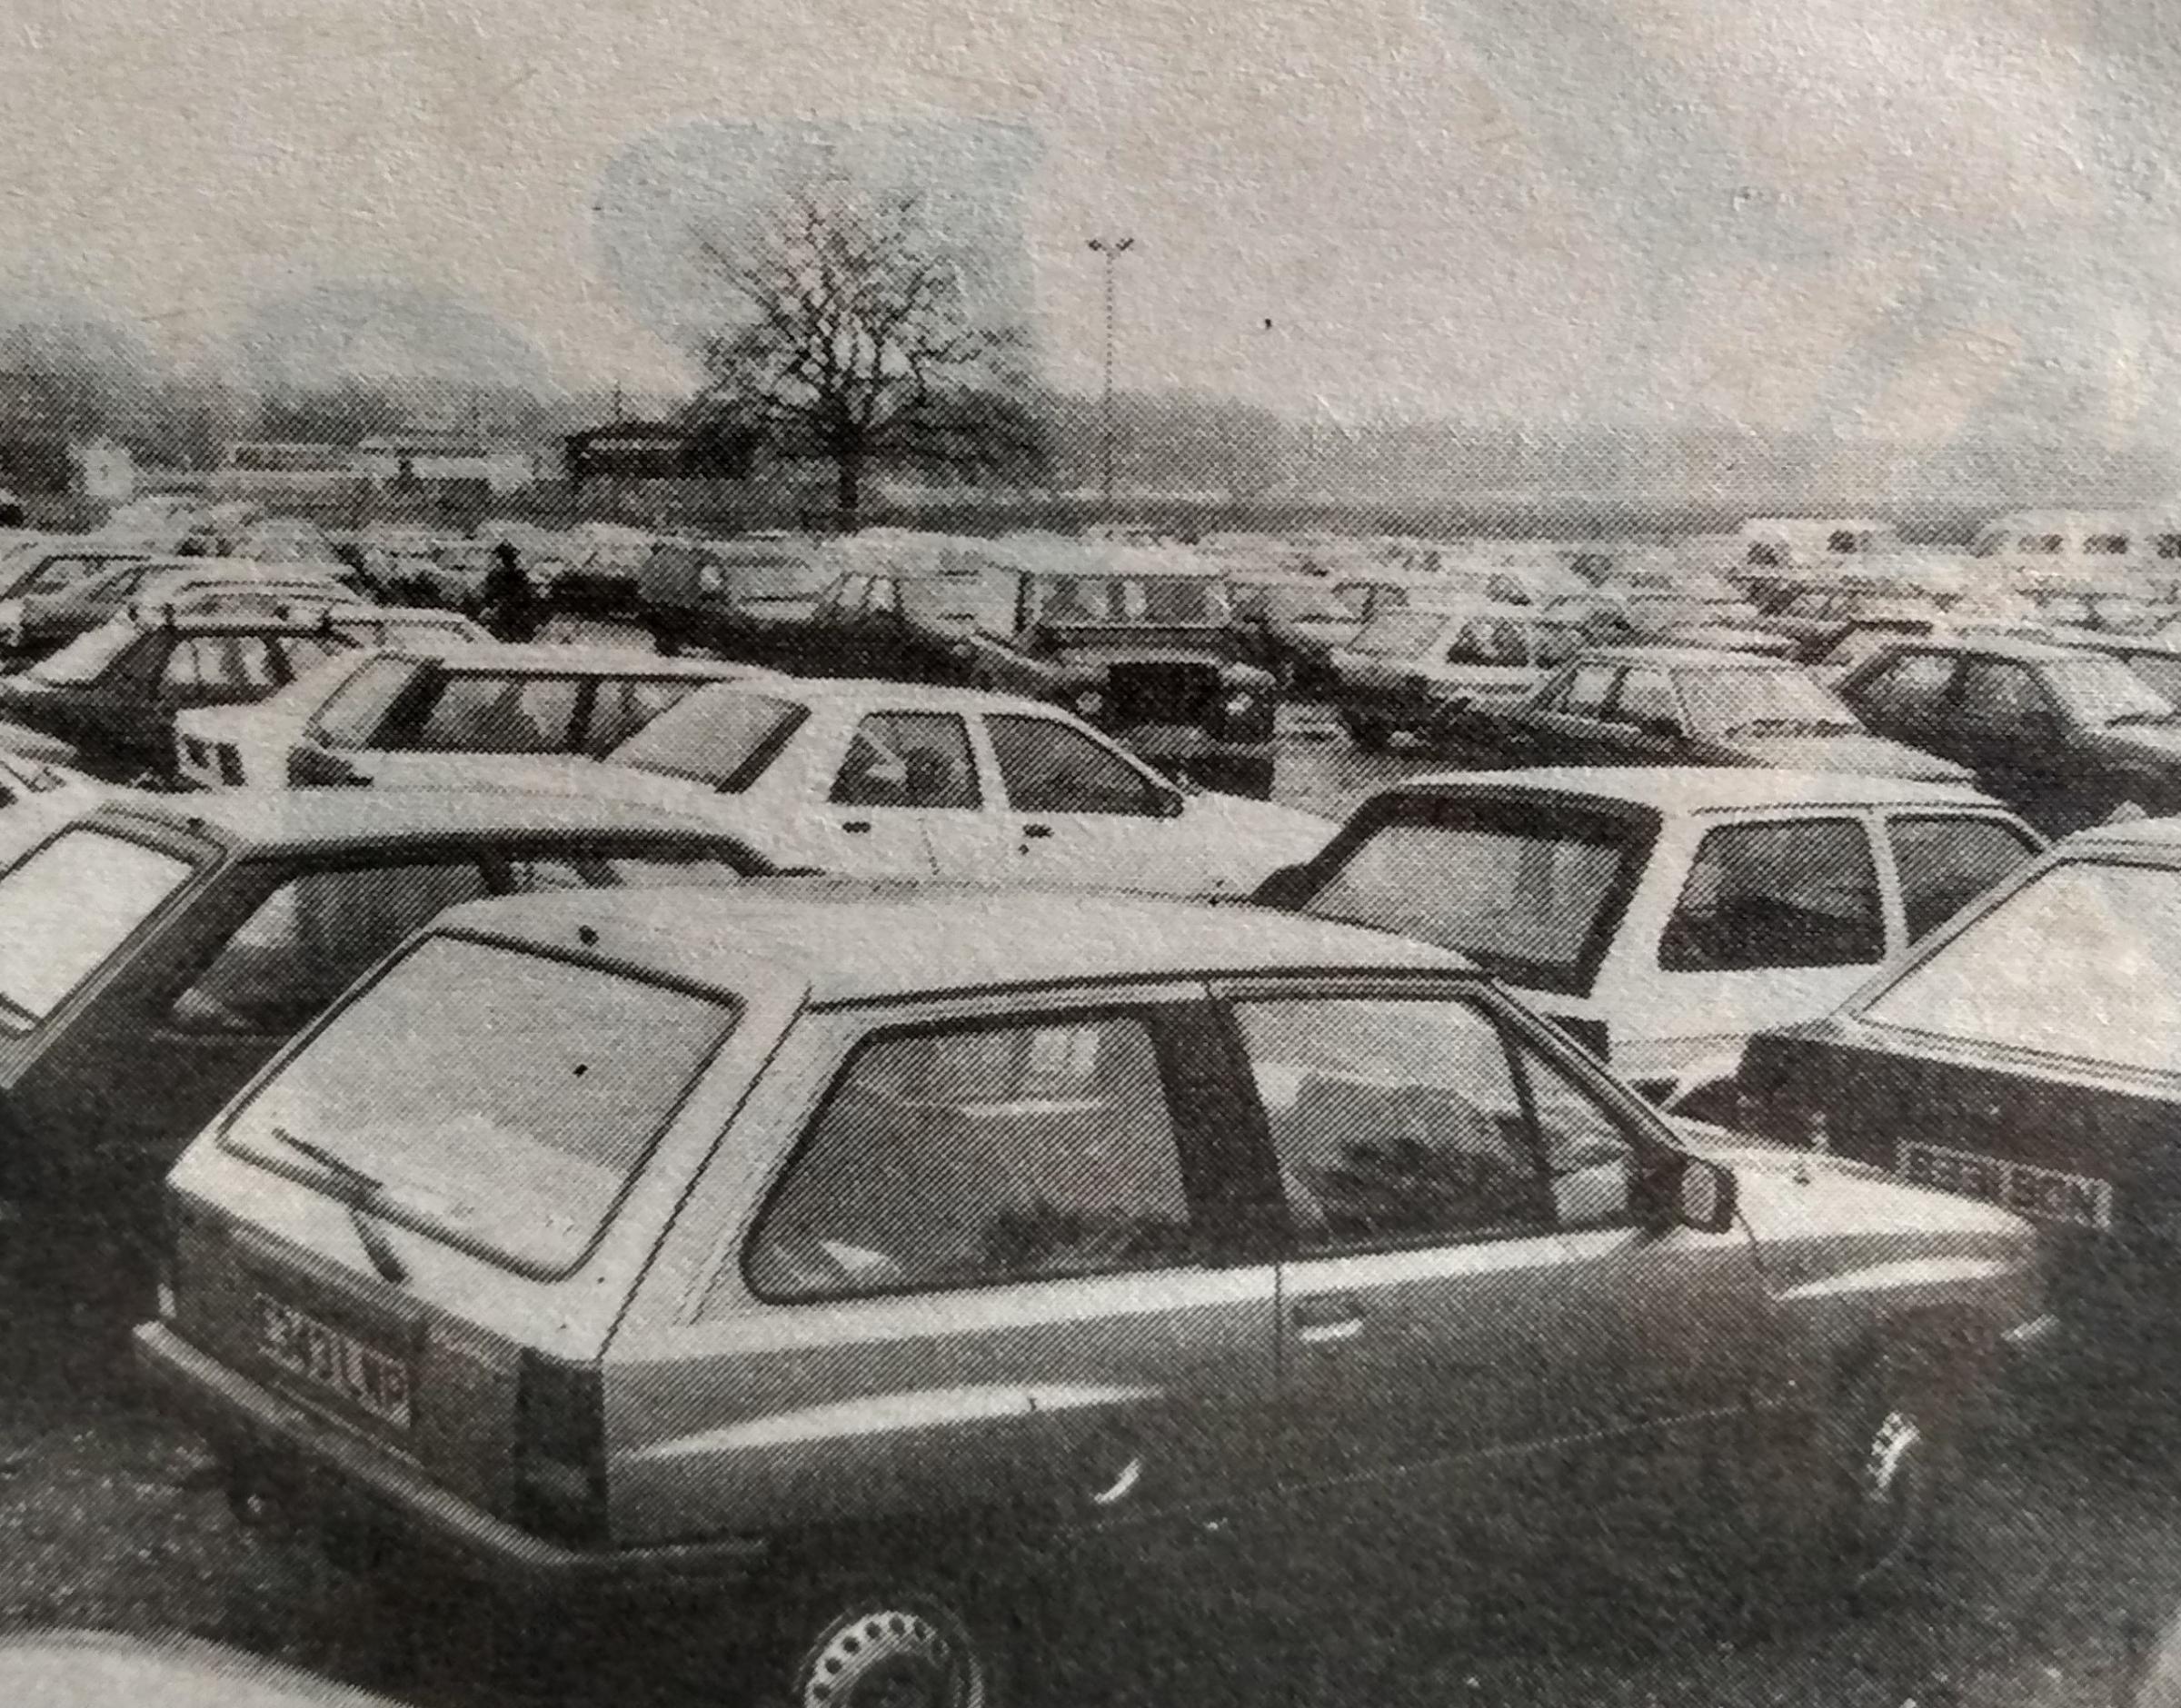 February 1992 and the city’s planning chief was bemoaning the blot on the landscape that was the hundreds of cars parking daily on Pitchcroft